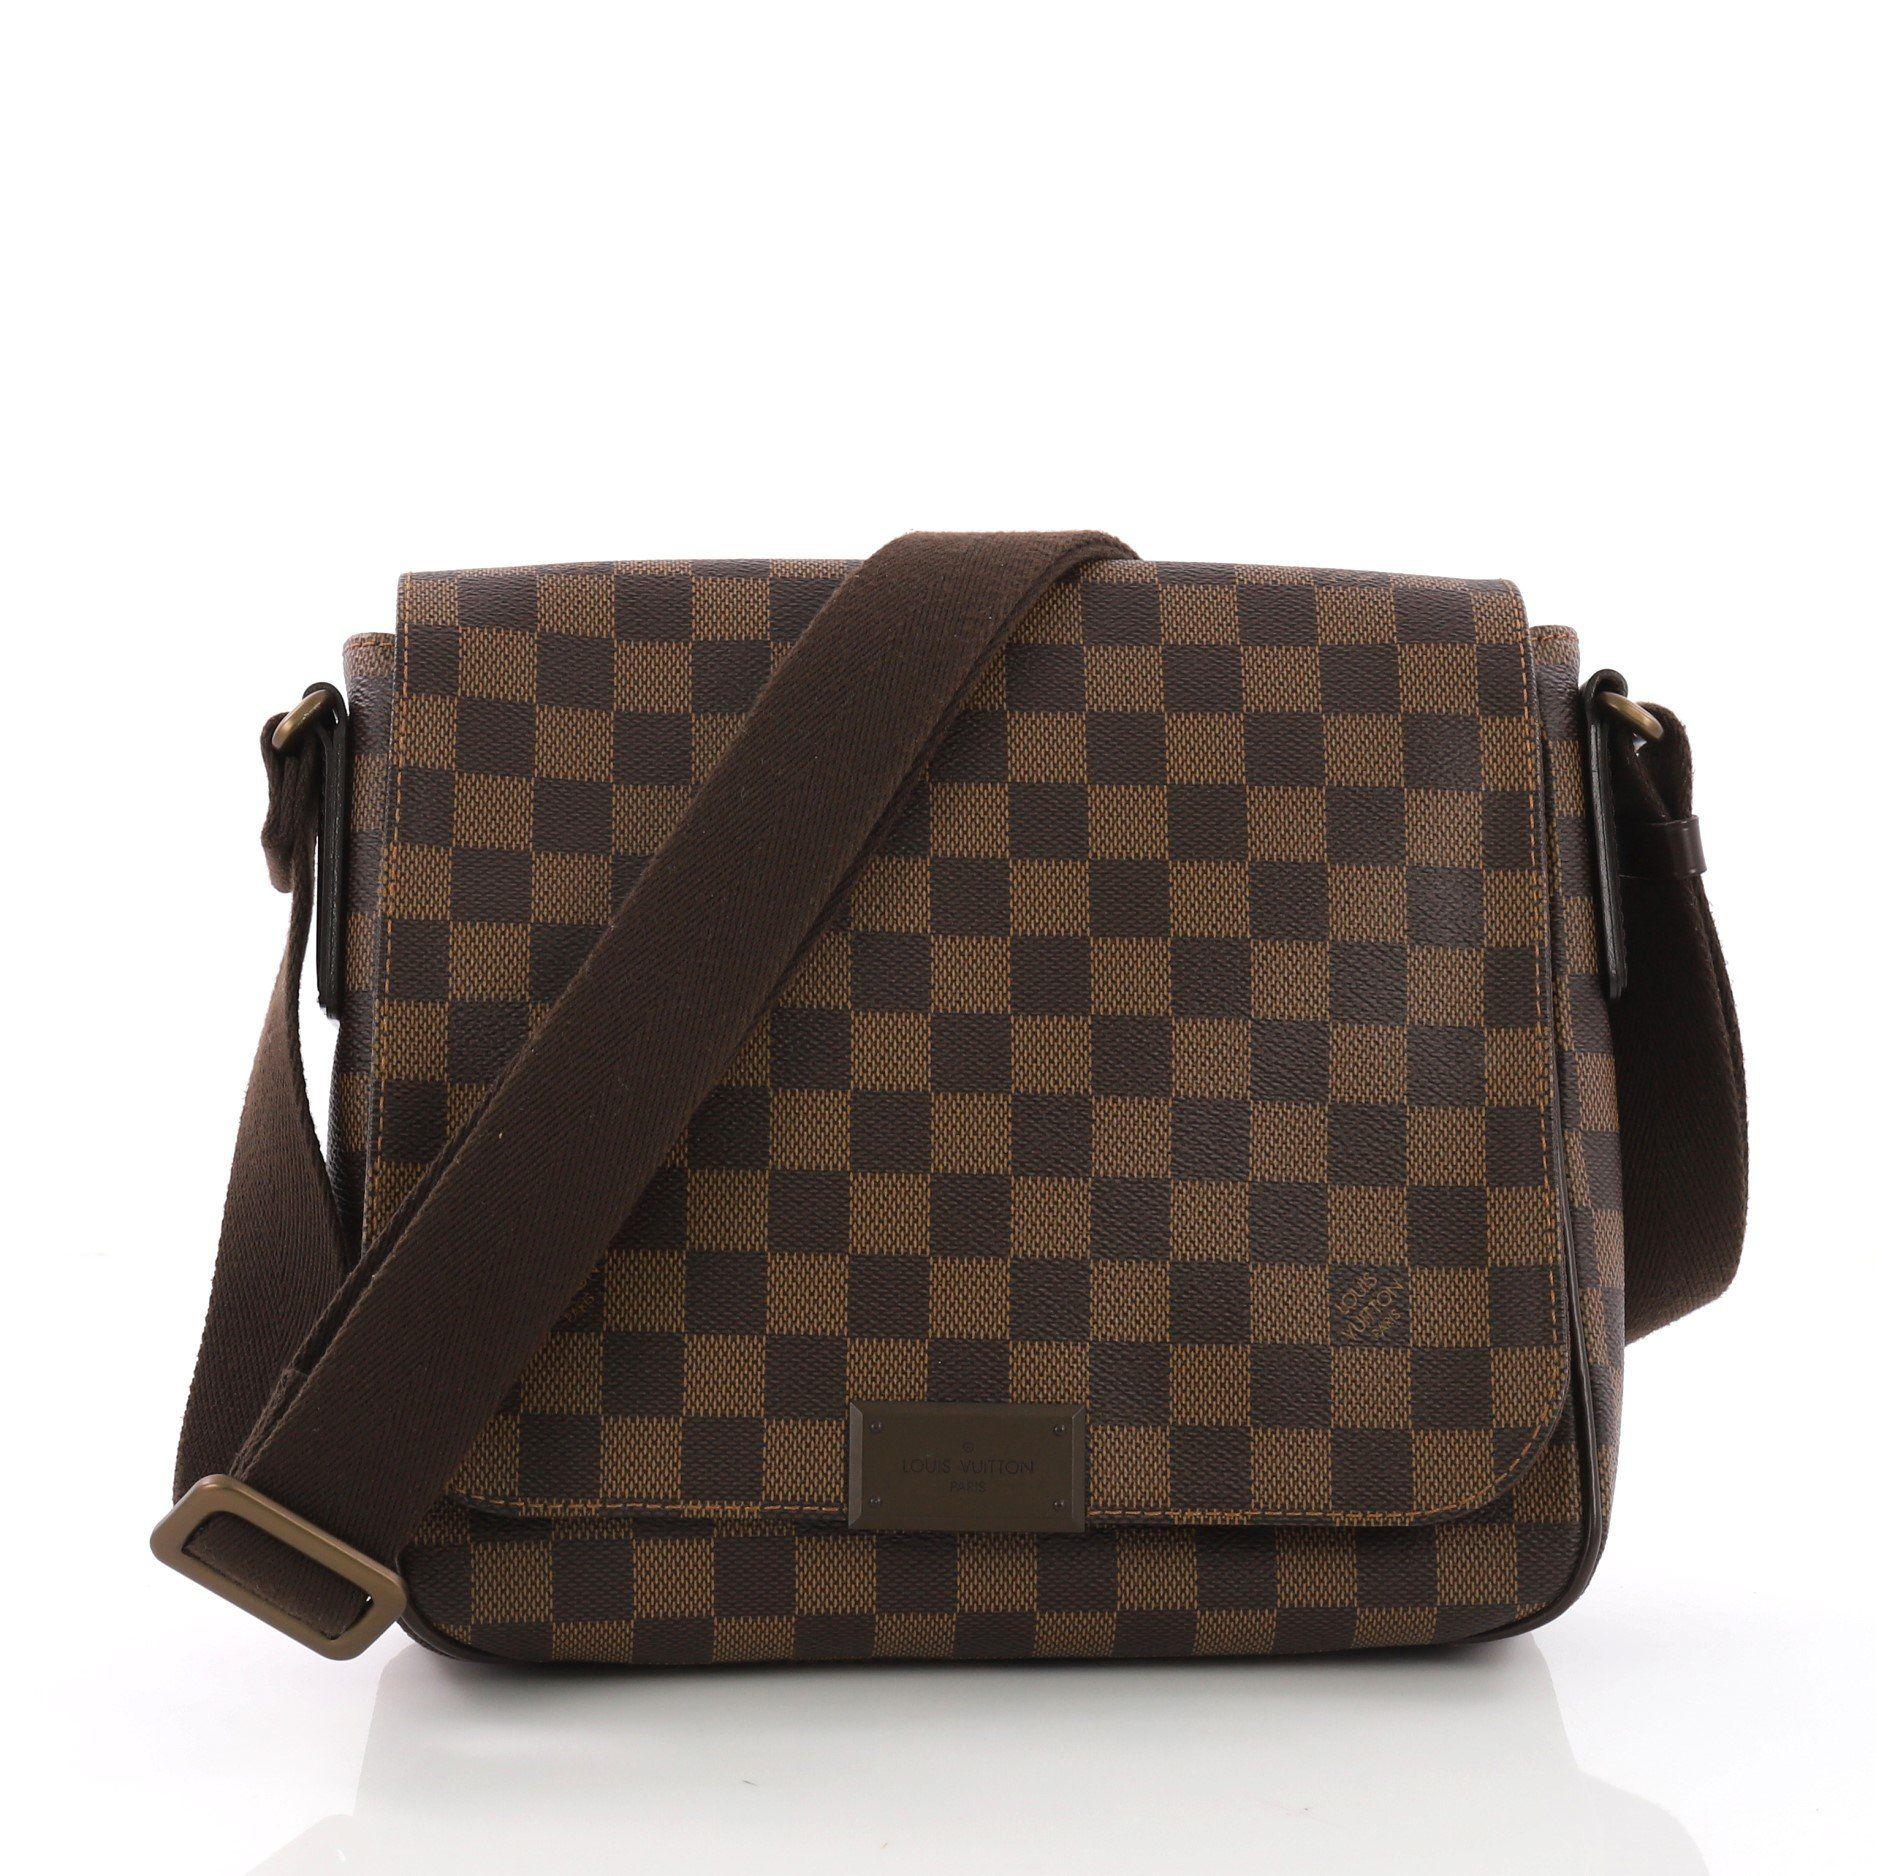 Lyst - Louis Vuitton Pre Owned District Messenger Bag Damier Pm in Brown